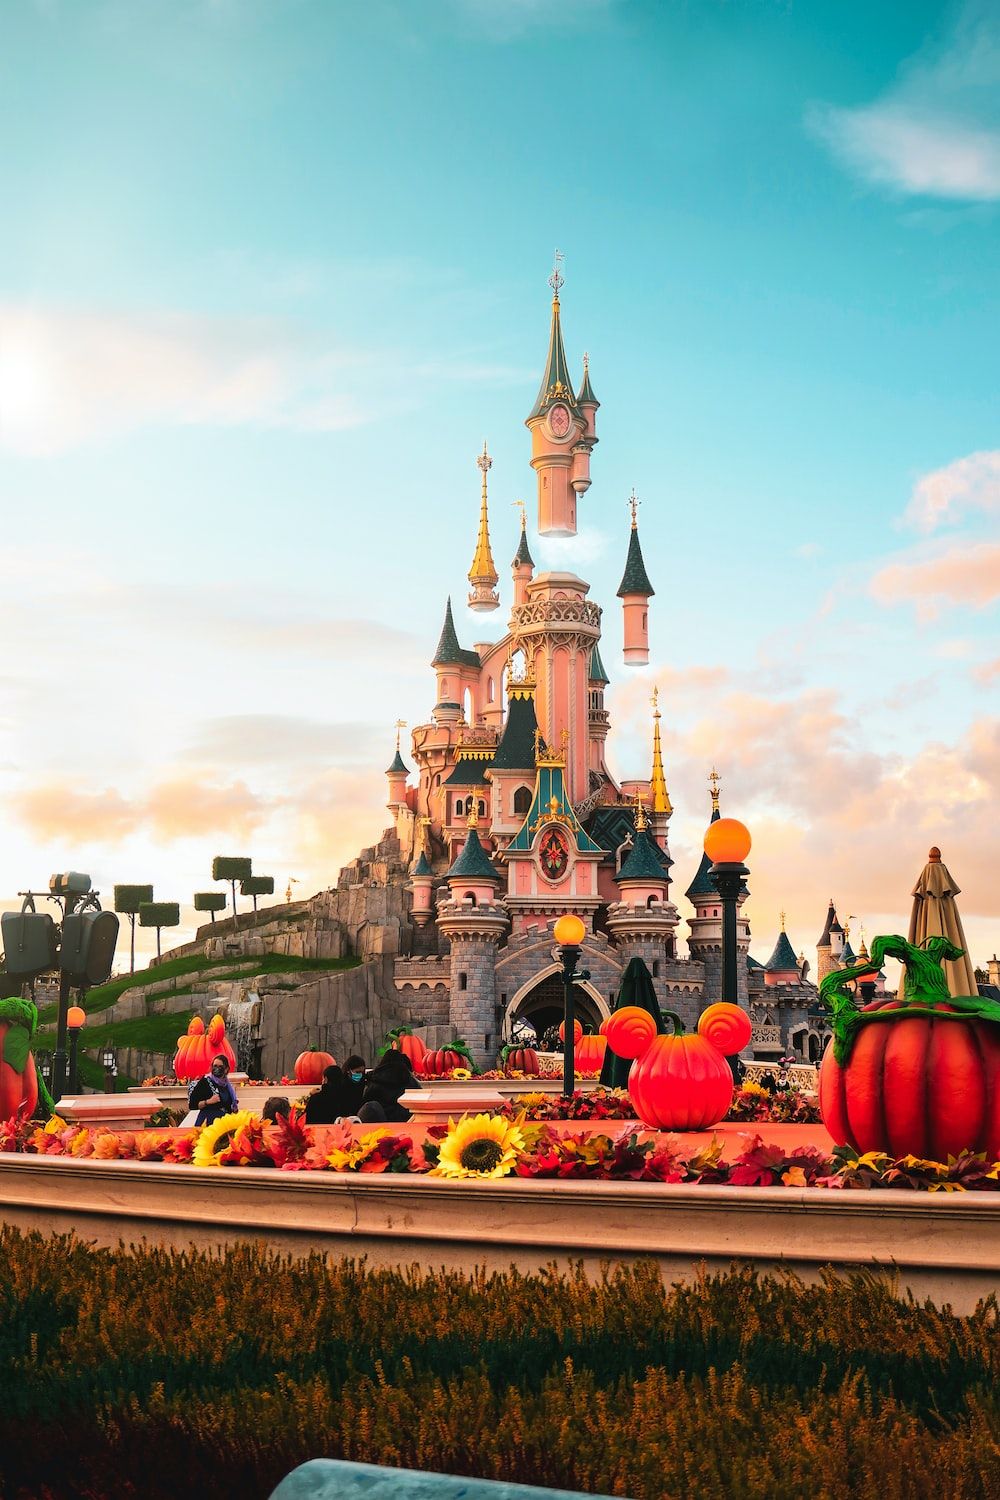 The castle is surrounded by flowers and pumpkins - Disneyland